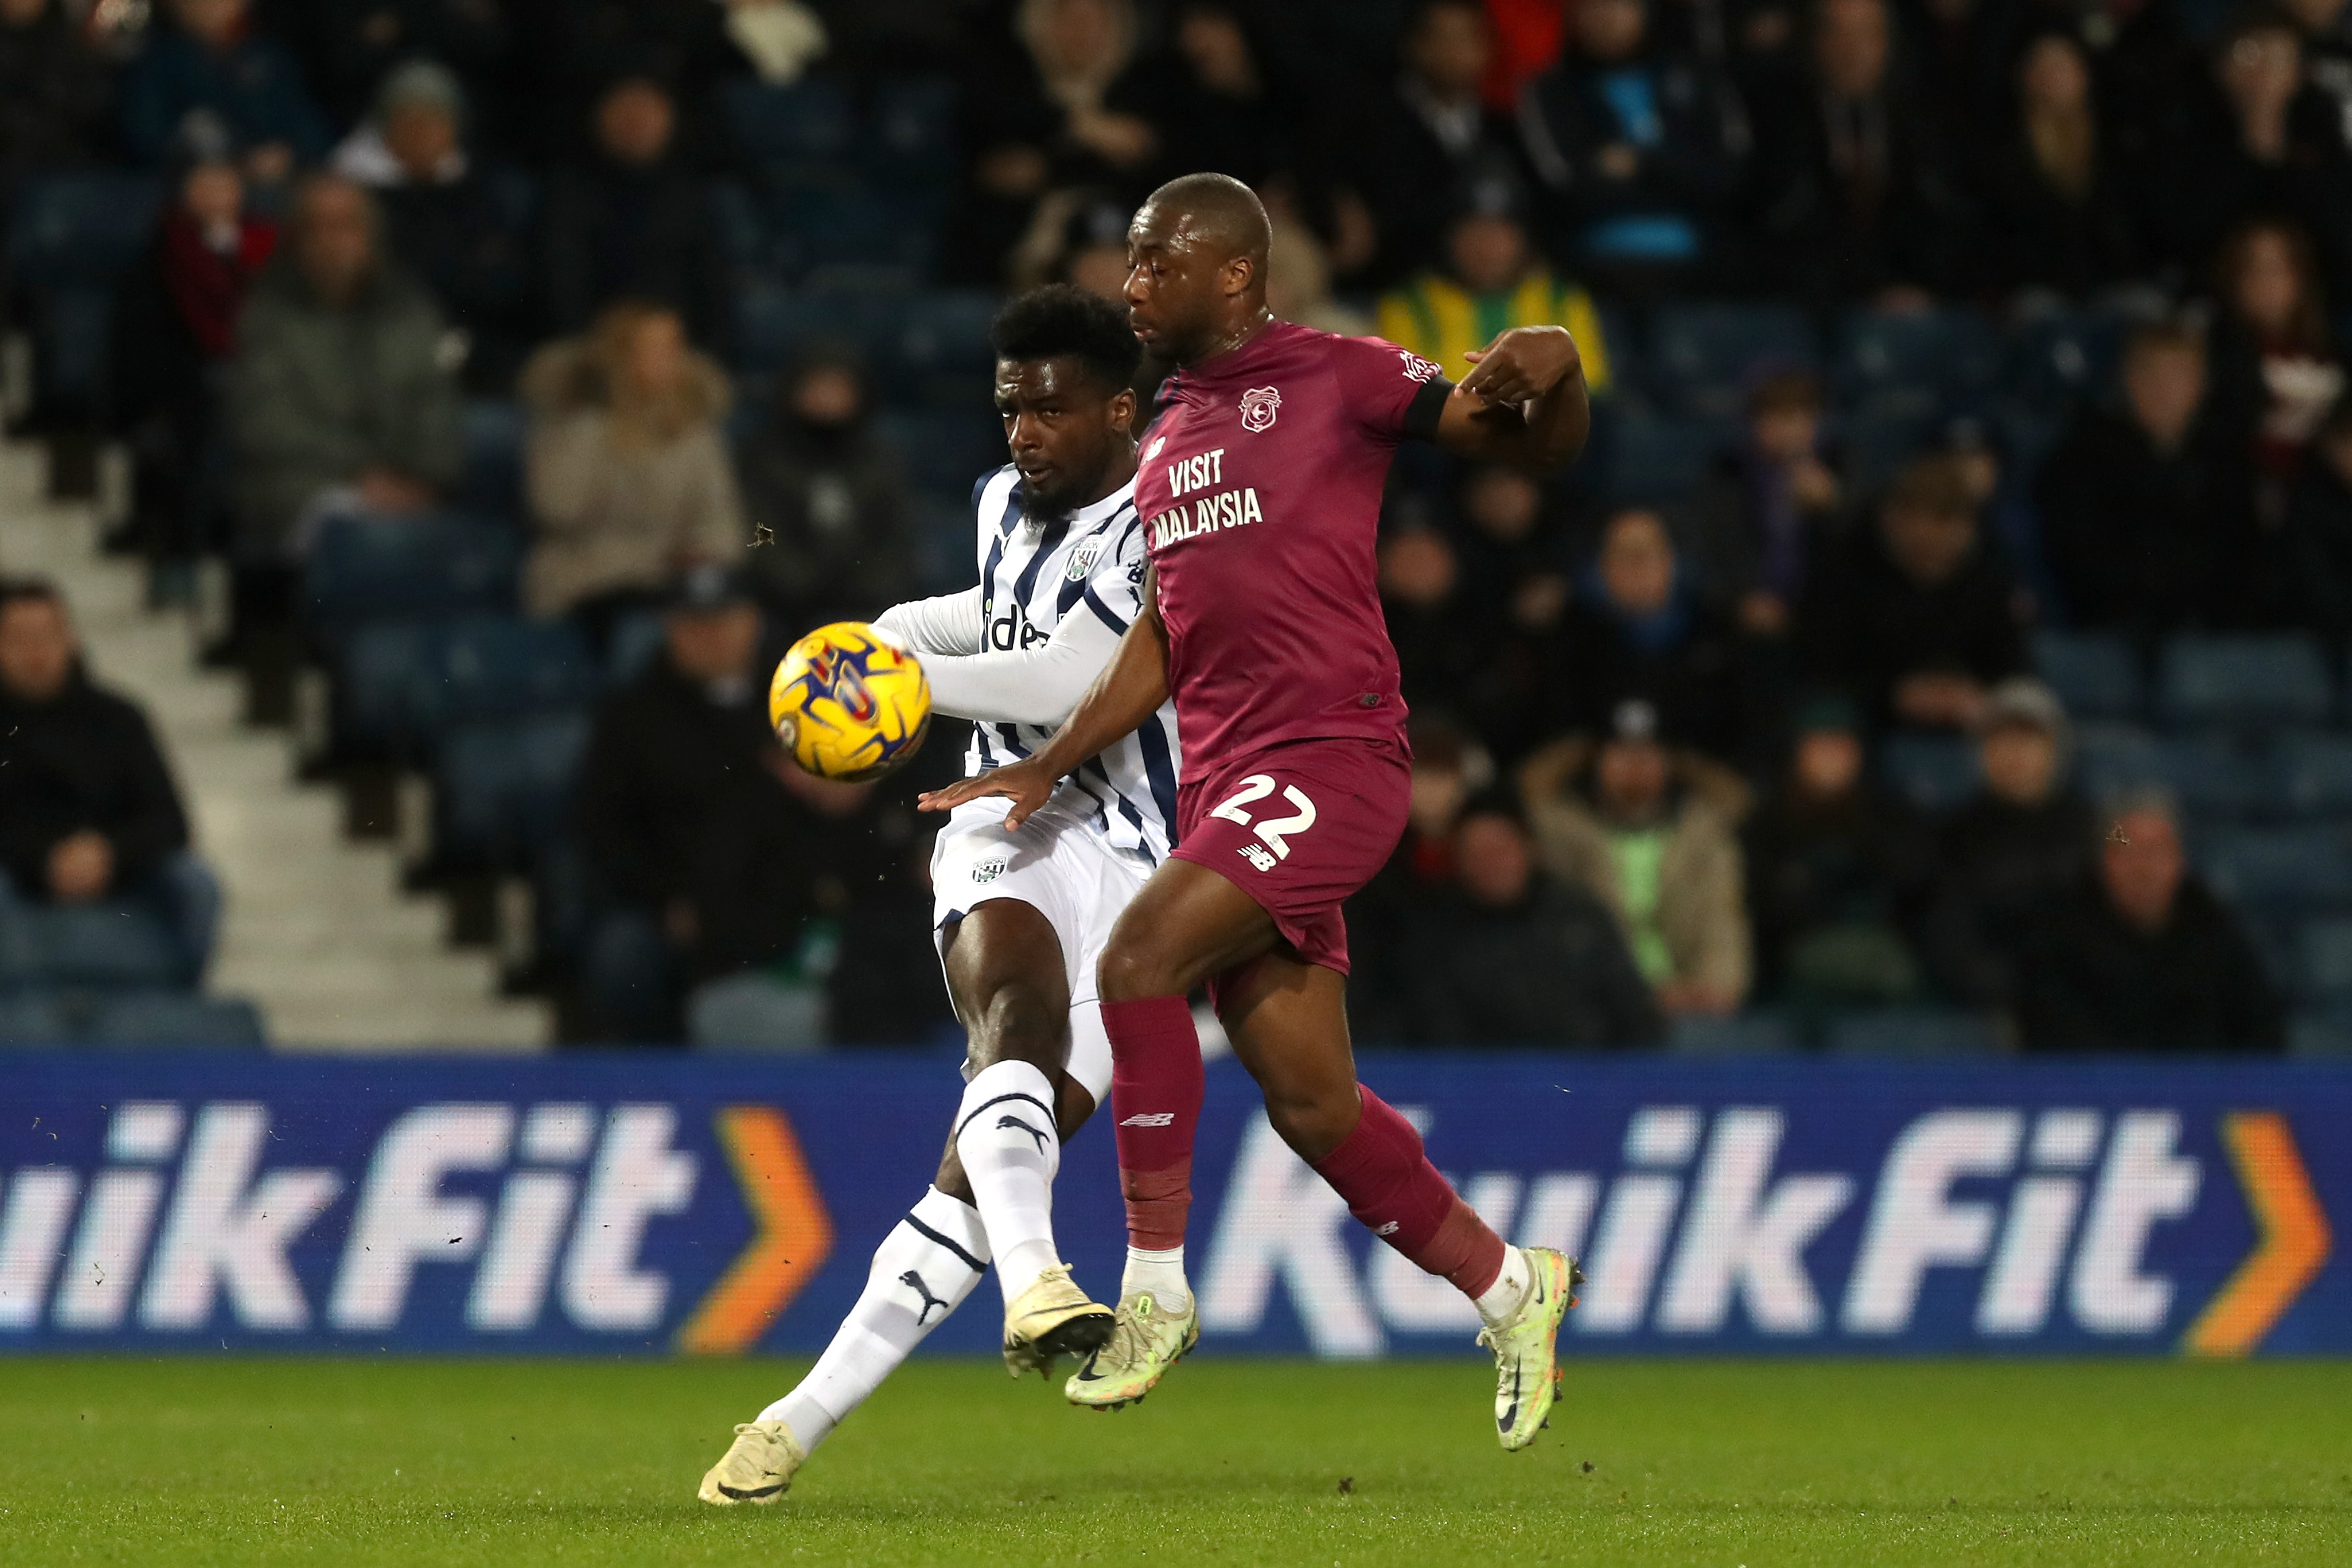 Cedric Kipre passing the ball during the game against Cardiff City